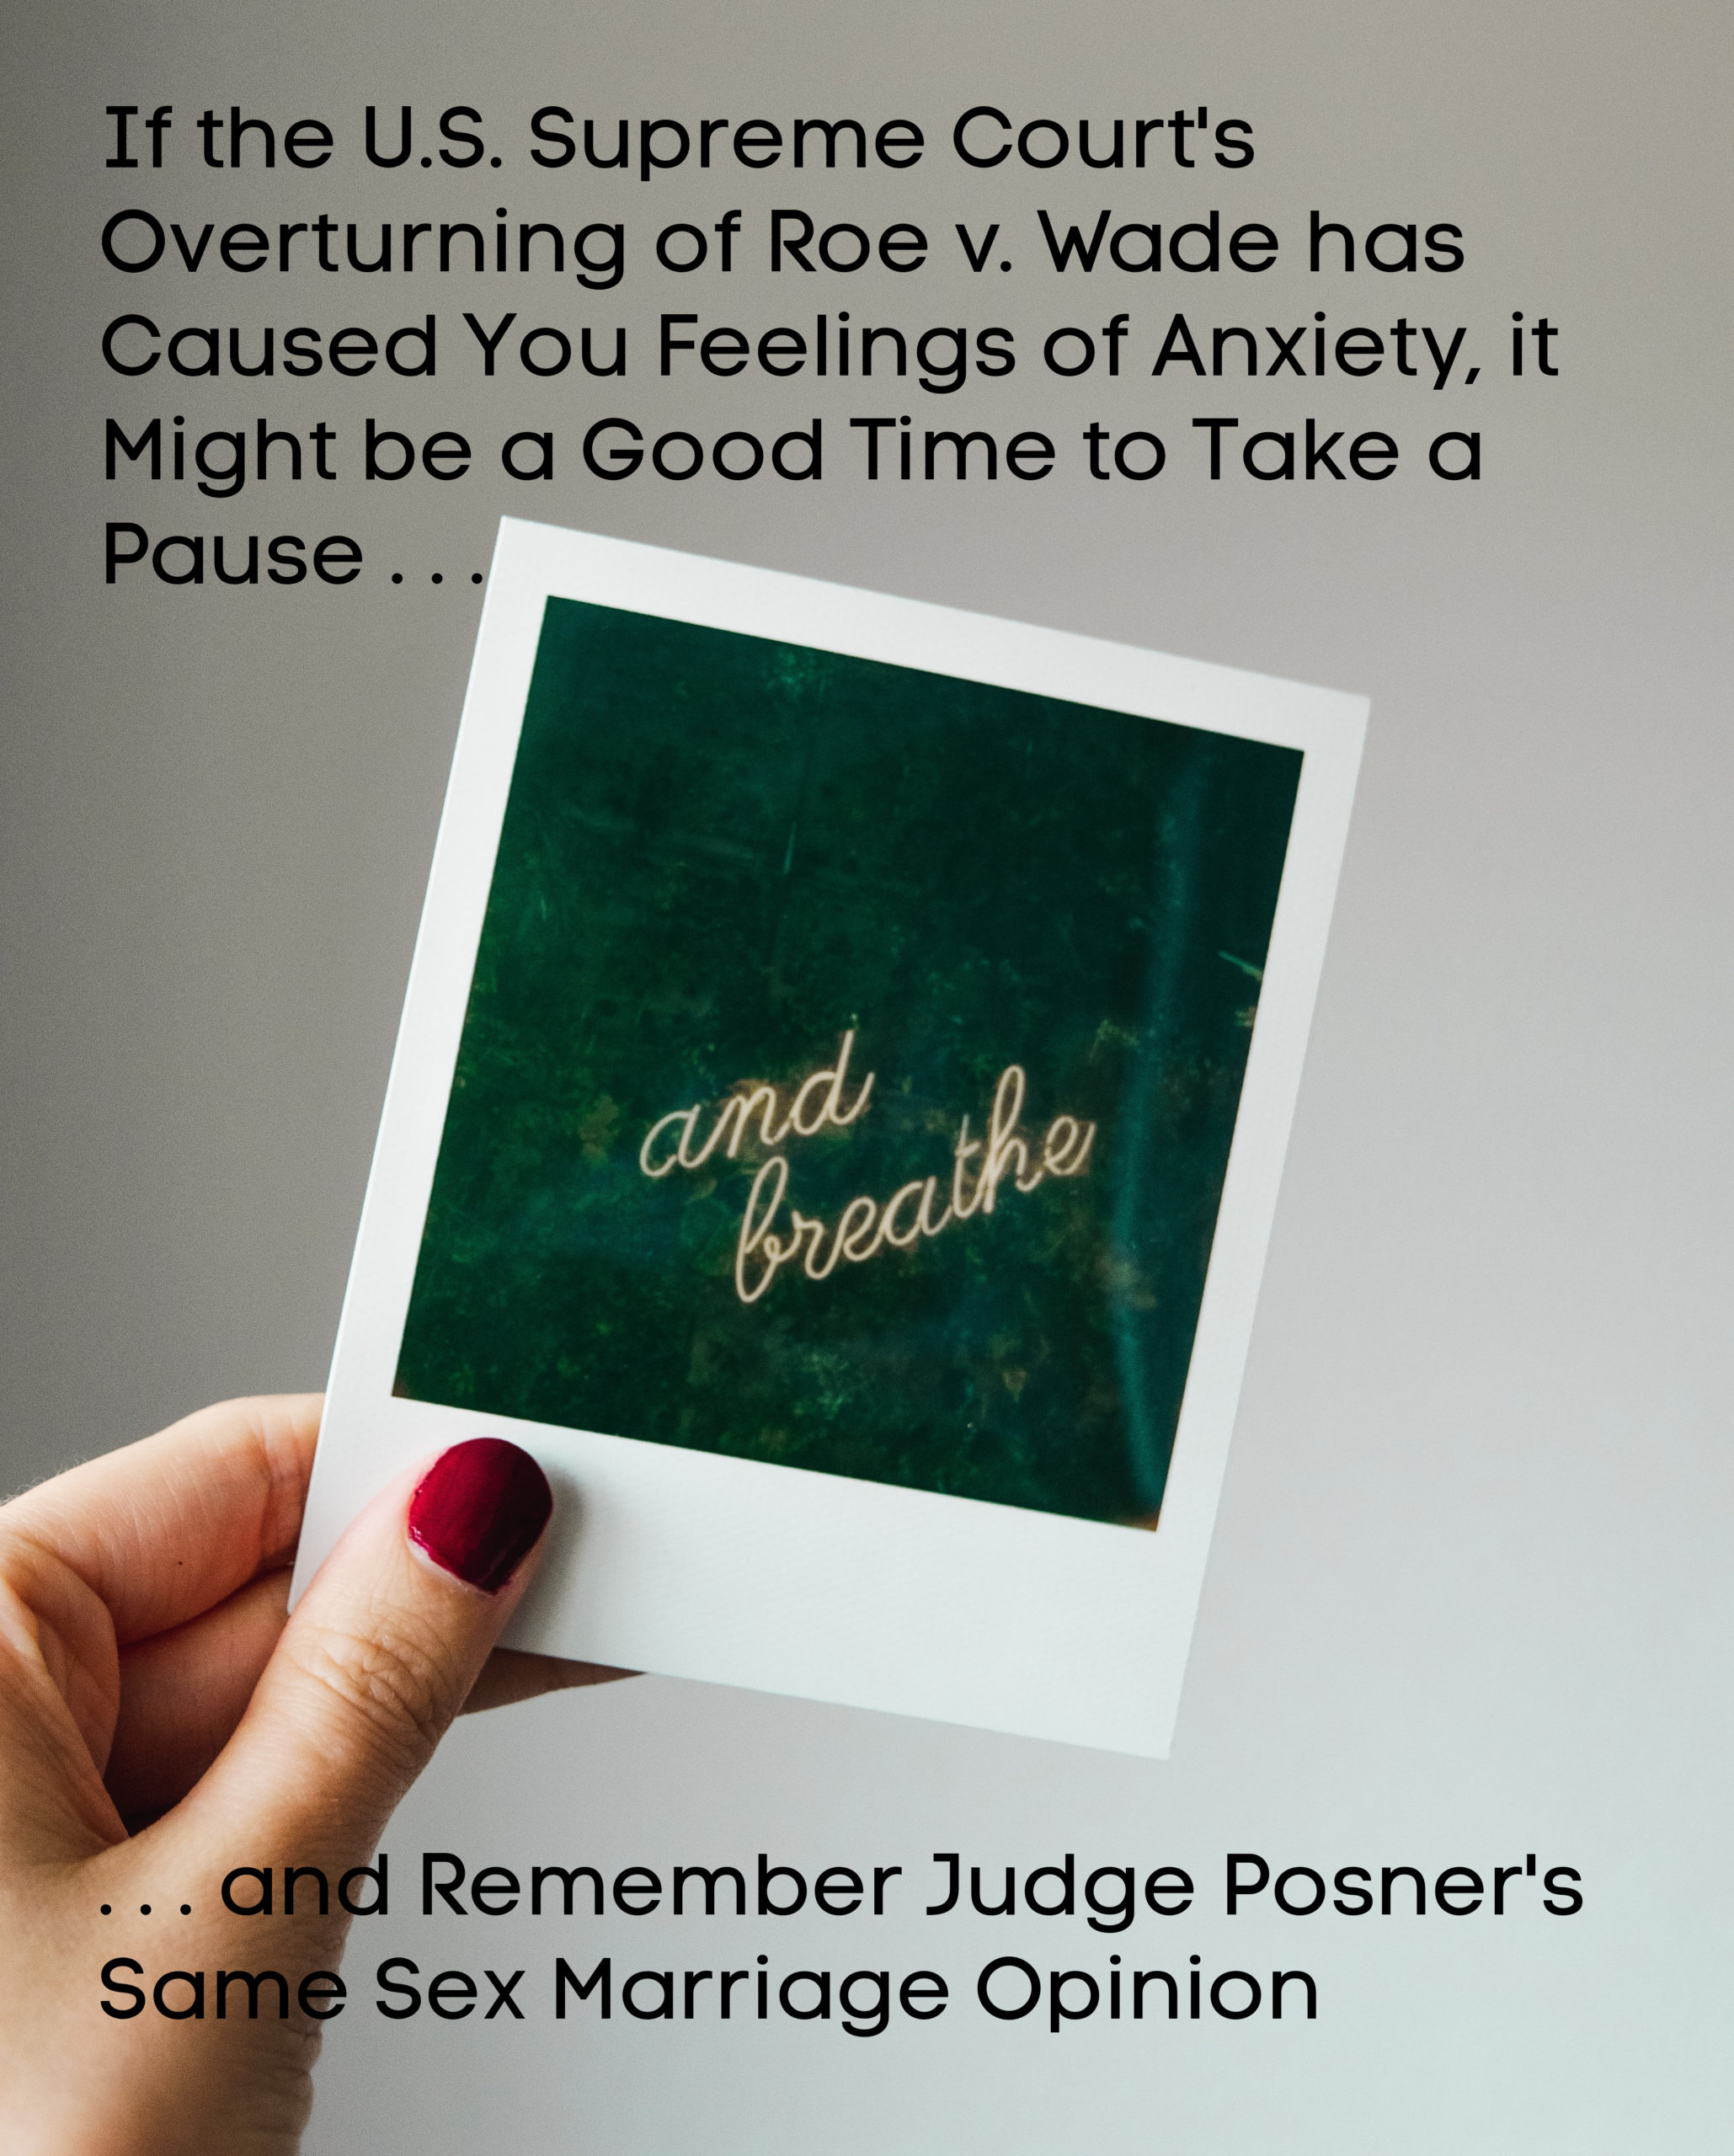 If the U.S. Supreme Court’s Overturning of Roe v. Wade has Caused You Feelings of Anxiety, it Might be a Good Time to Take a Pause . . .